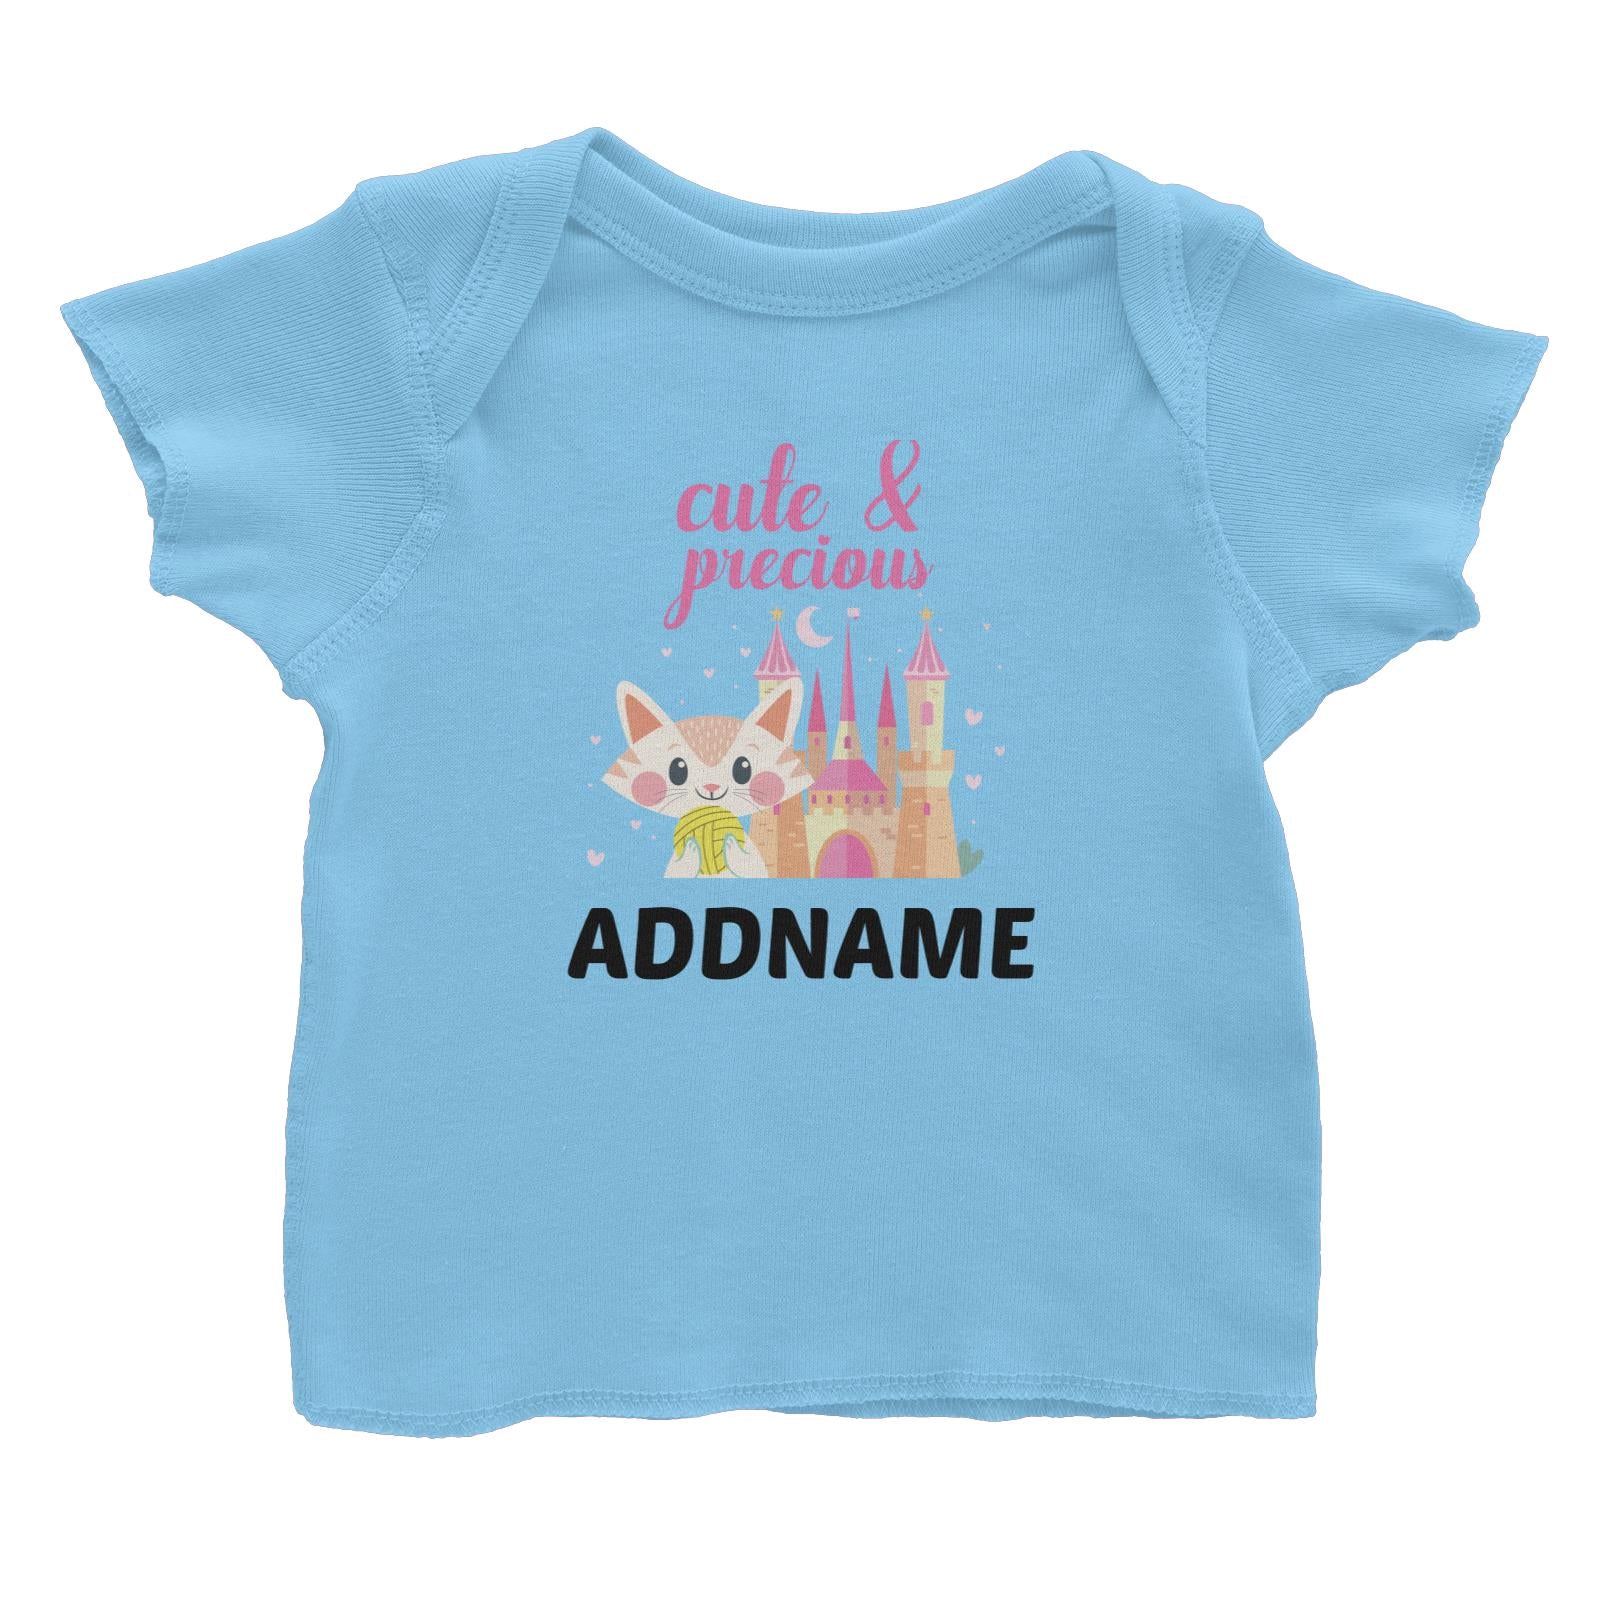 Cute And Precious Addname Baby T-Shirt